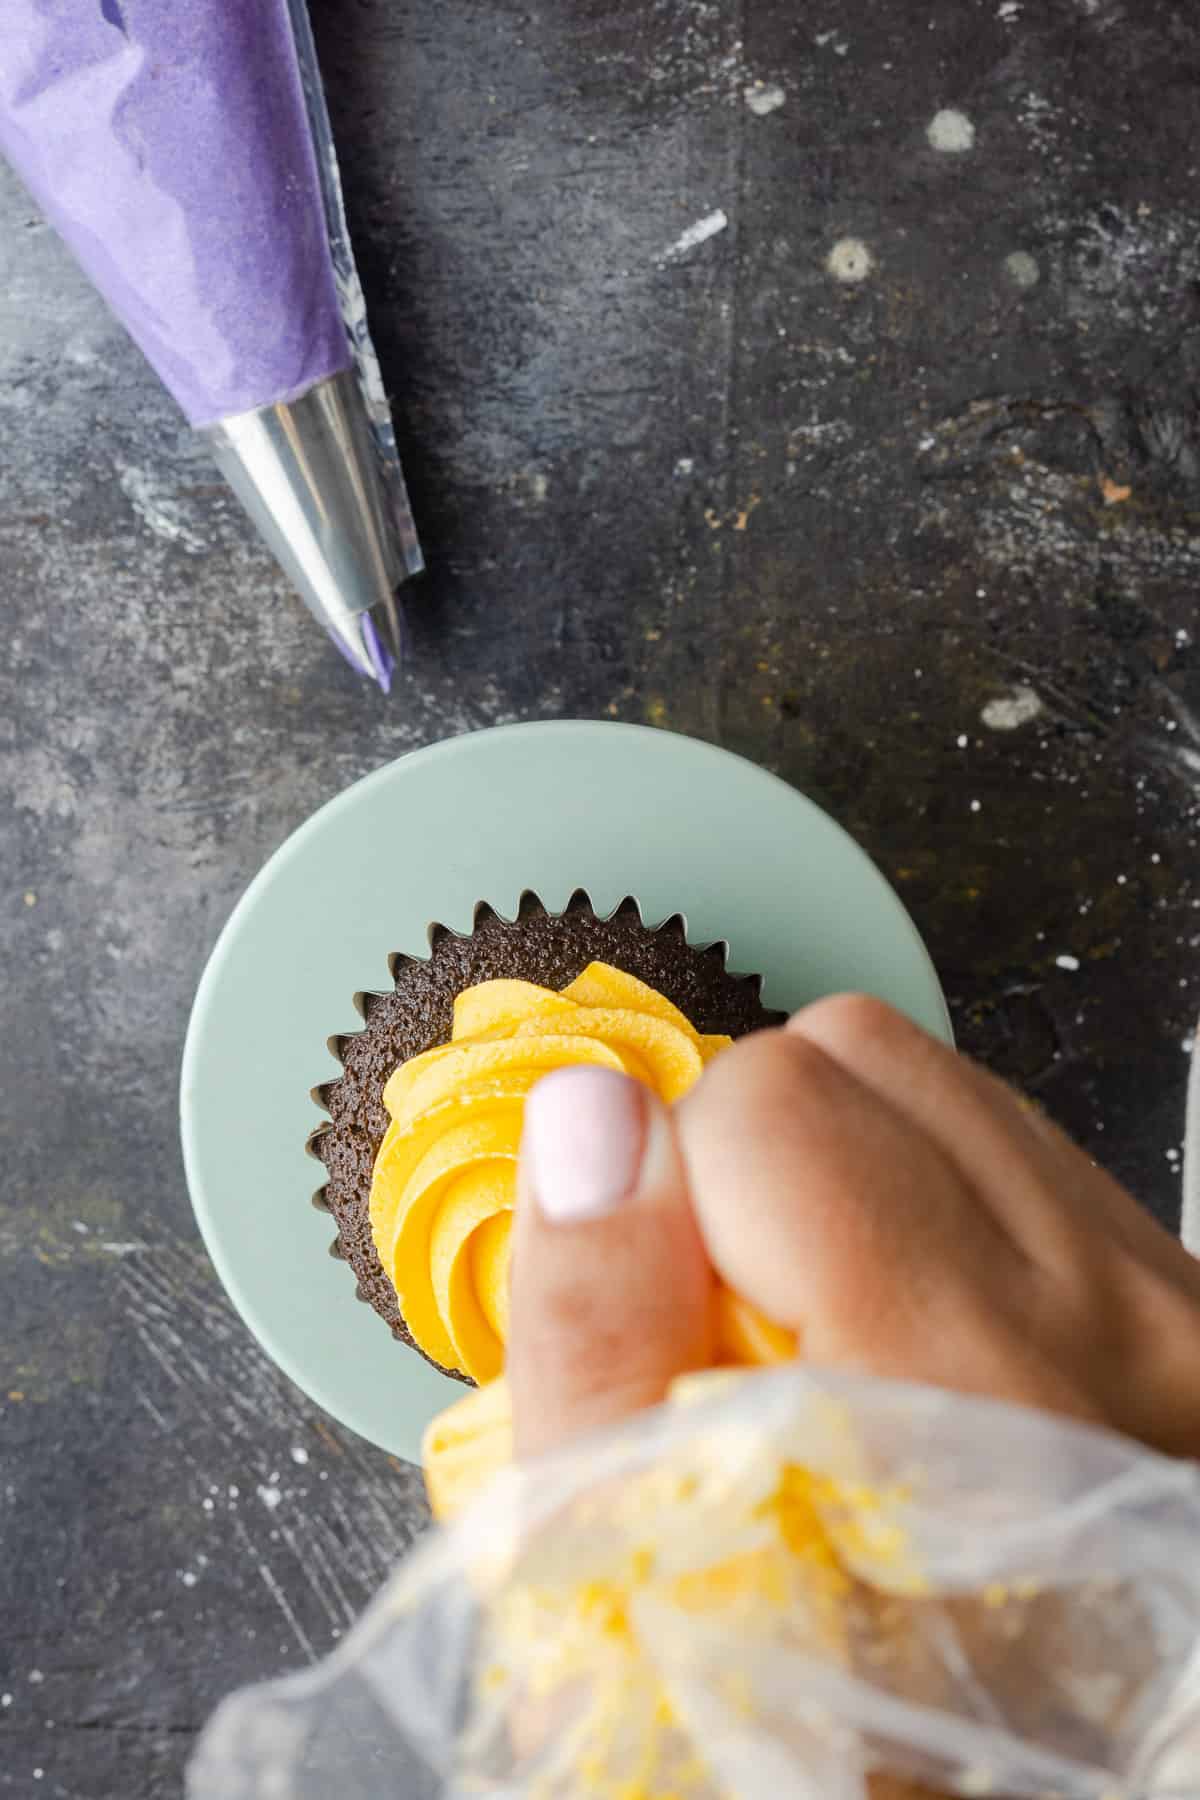 A hand piping a swirl of yellow frosting onto a cupcake.